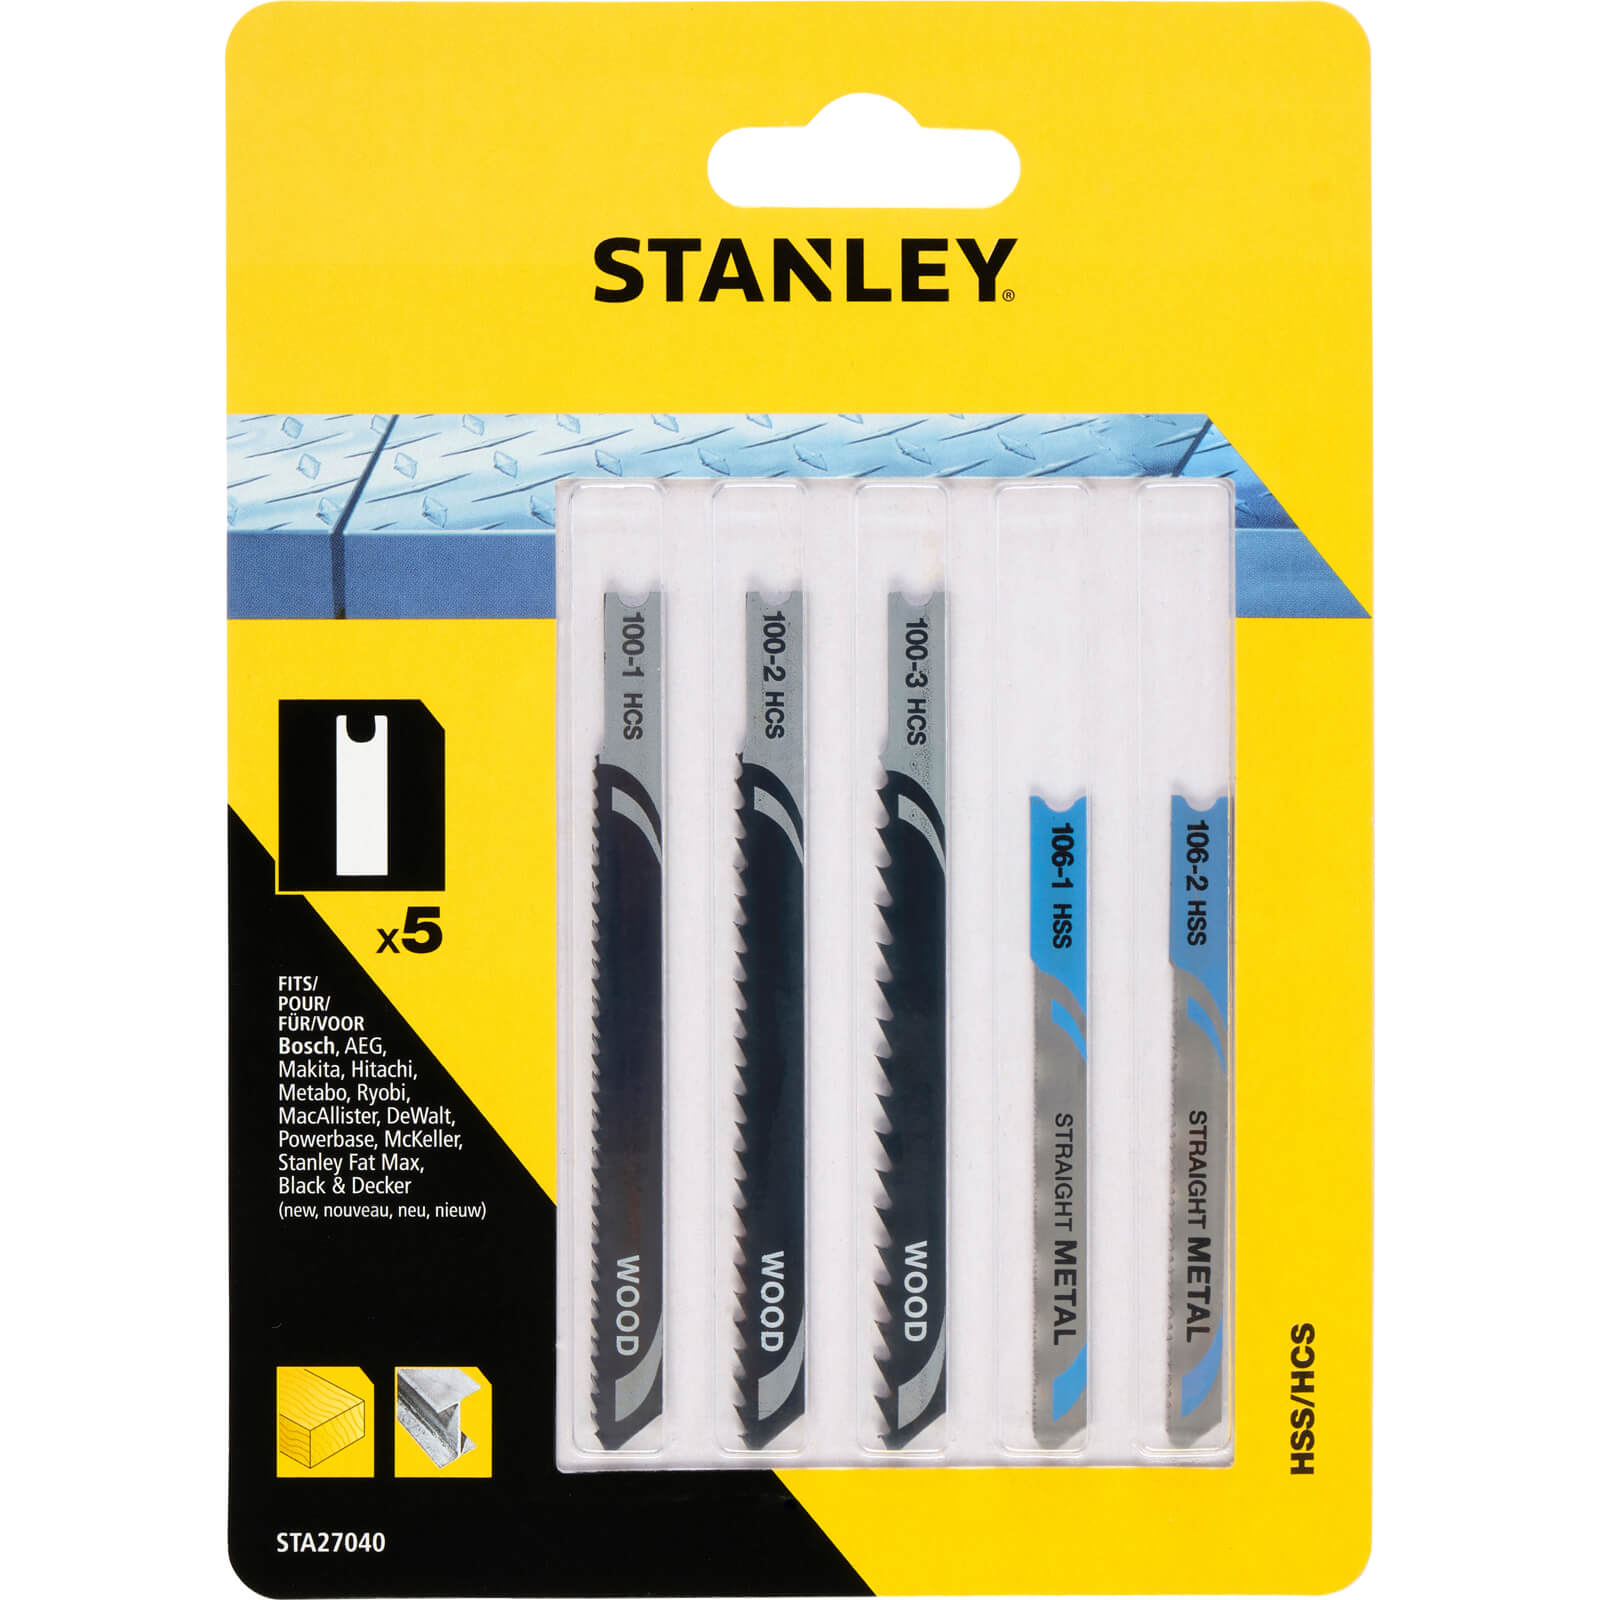 Photos - Power Tool Accessory Stanley 5 Piece U Shank Jigsaw Blade Set for Wood and Metal STA27040 